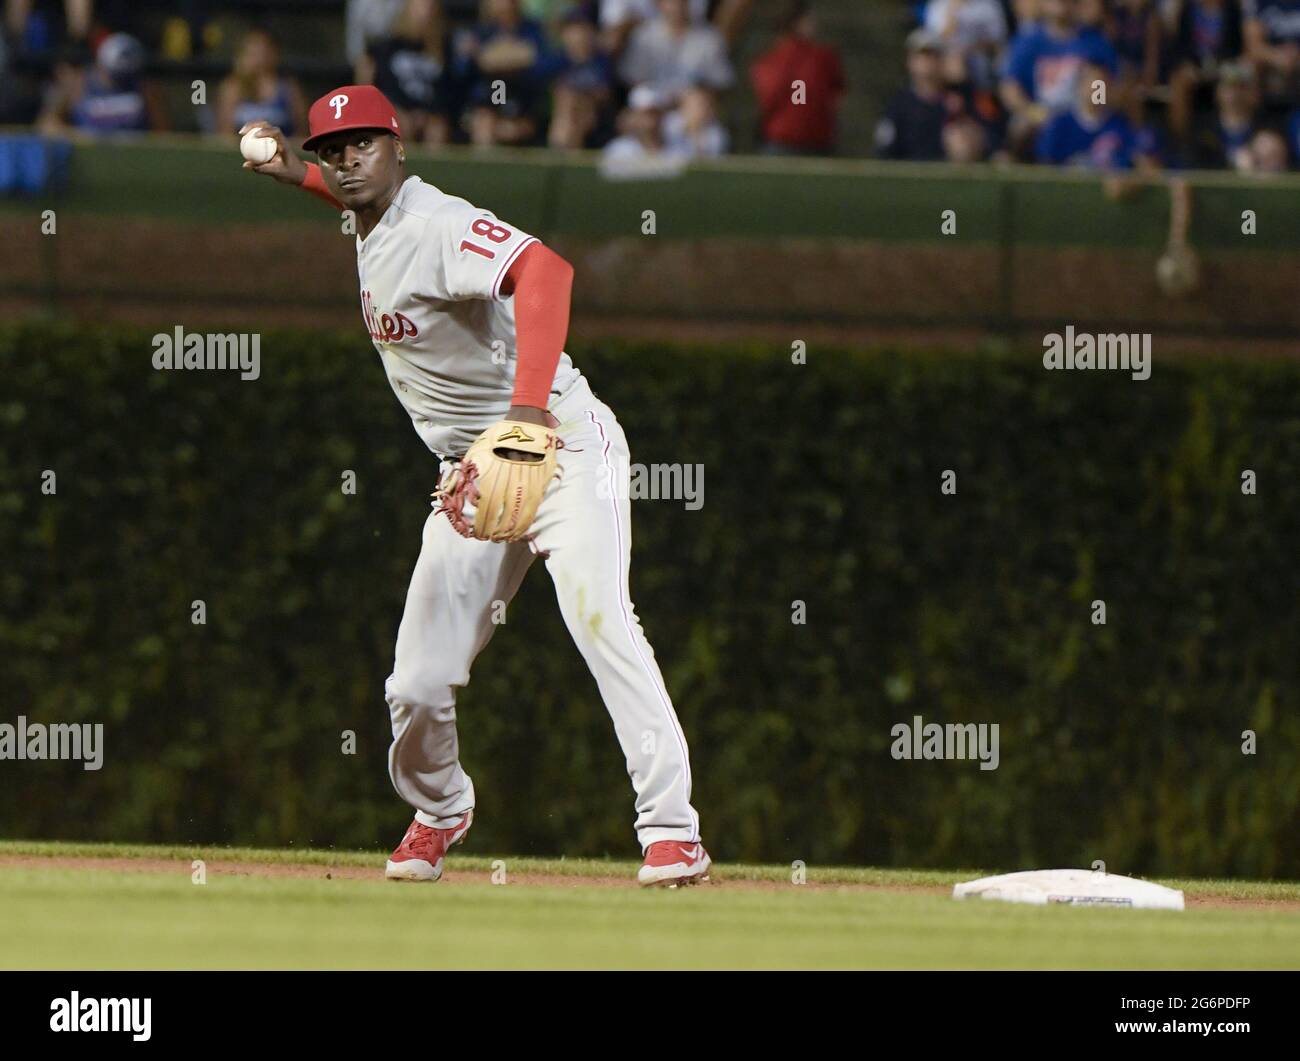 Would Didi Gregorius Be Good Fit for St. Louis Cardinals?